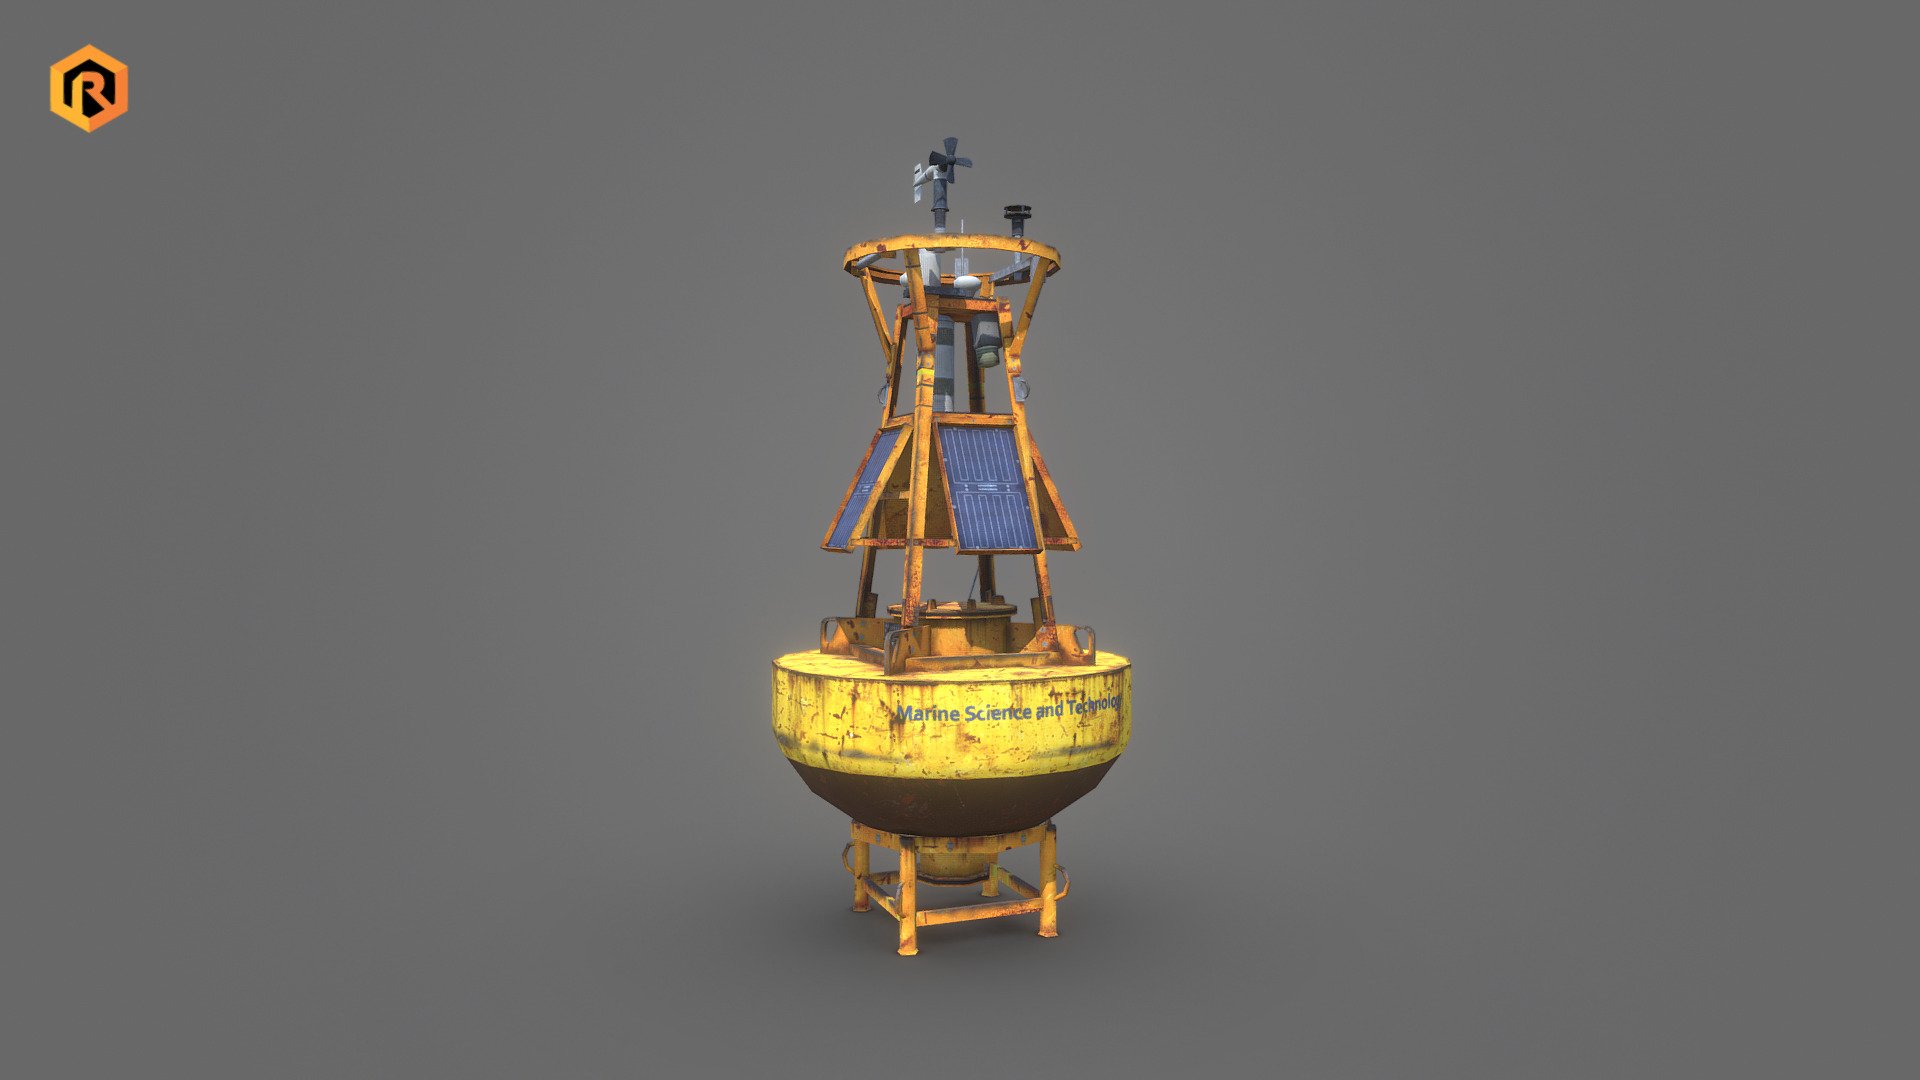 High-quality low-poly 3D model of Ocean Weather Buoy.

It is best for use in games and other VR / AR, real-time applications such as Unity or Unreal Engine.

It can also be rendered in Blender (ex Cycles) or Vray as the model is equipped with detailed textures.

This way it is also good enough for close-ups. Model is built with great attention to details and realistic proportions with correct geometry. 

Technical details:

- 2048 x 2048 Diffuse and AO textures

- 3000 Triangles

- 1655 Polygons

- 1890 Vertices

- Model is one mesh.

- Model completely unwrapped.

- Model is fully textured with all materials applied. 

- Pivot point centered at world origin.

- Model scaled to approximate real world size (centimeters).

- All nodes, materials and textures are appropriately named 3d model